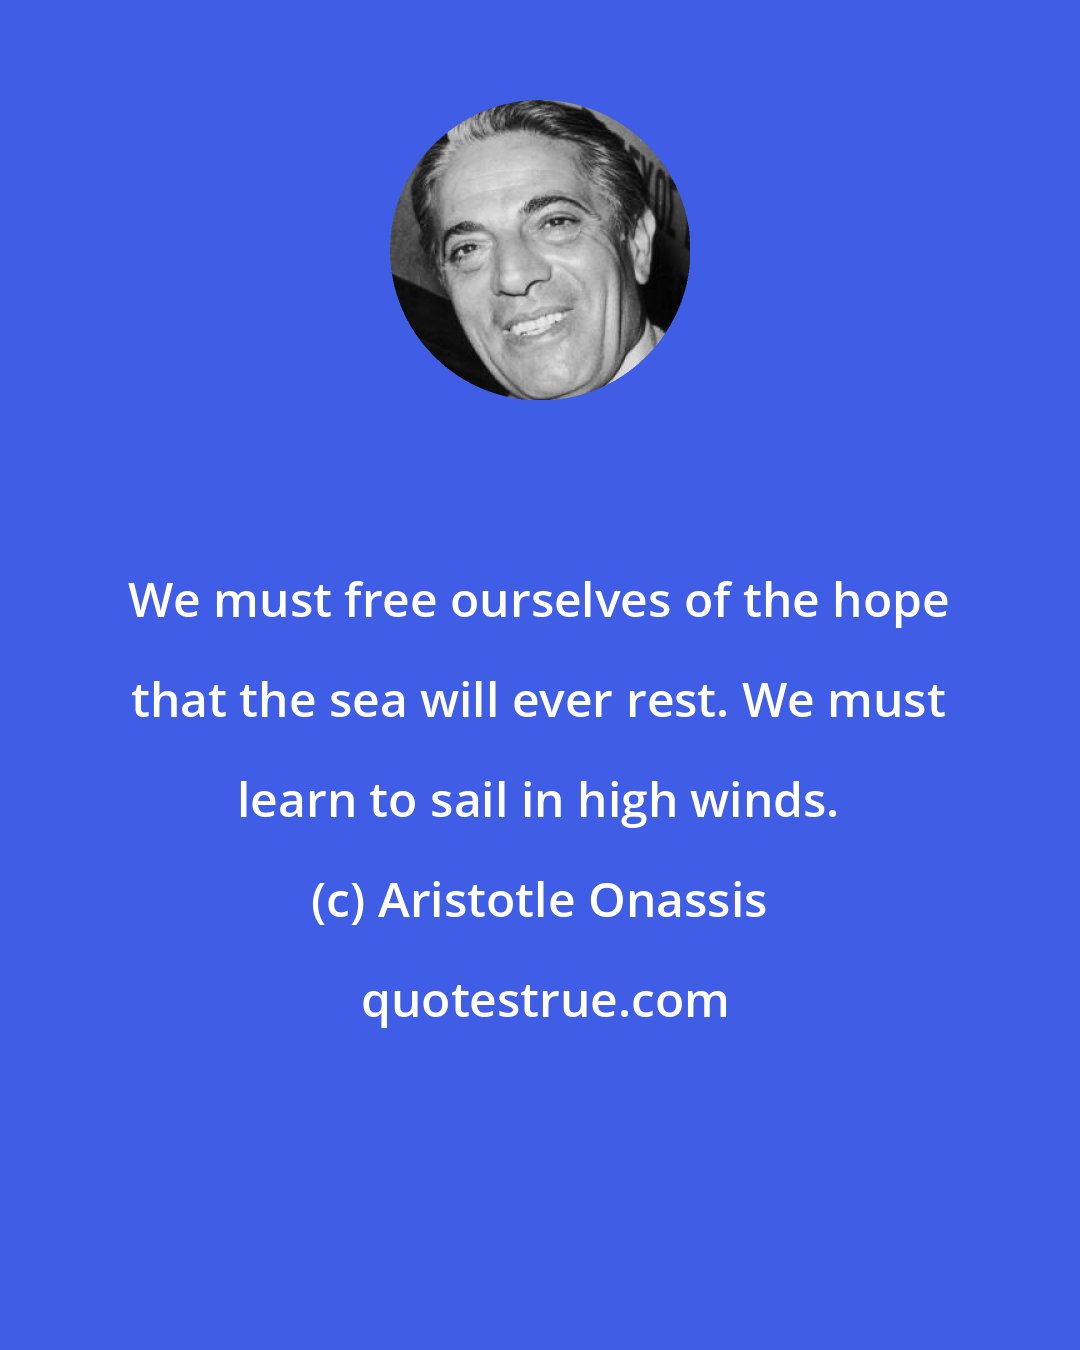 Aristotle Onassis: We must free ourselves of the hope that the sea will ever rest. We must learn to sail in high winds.